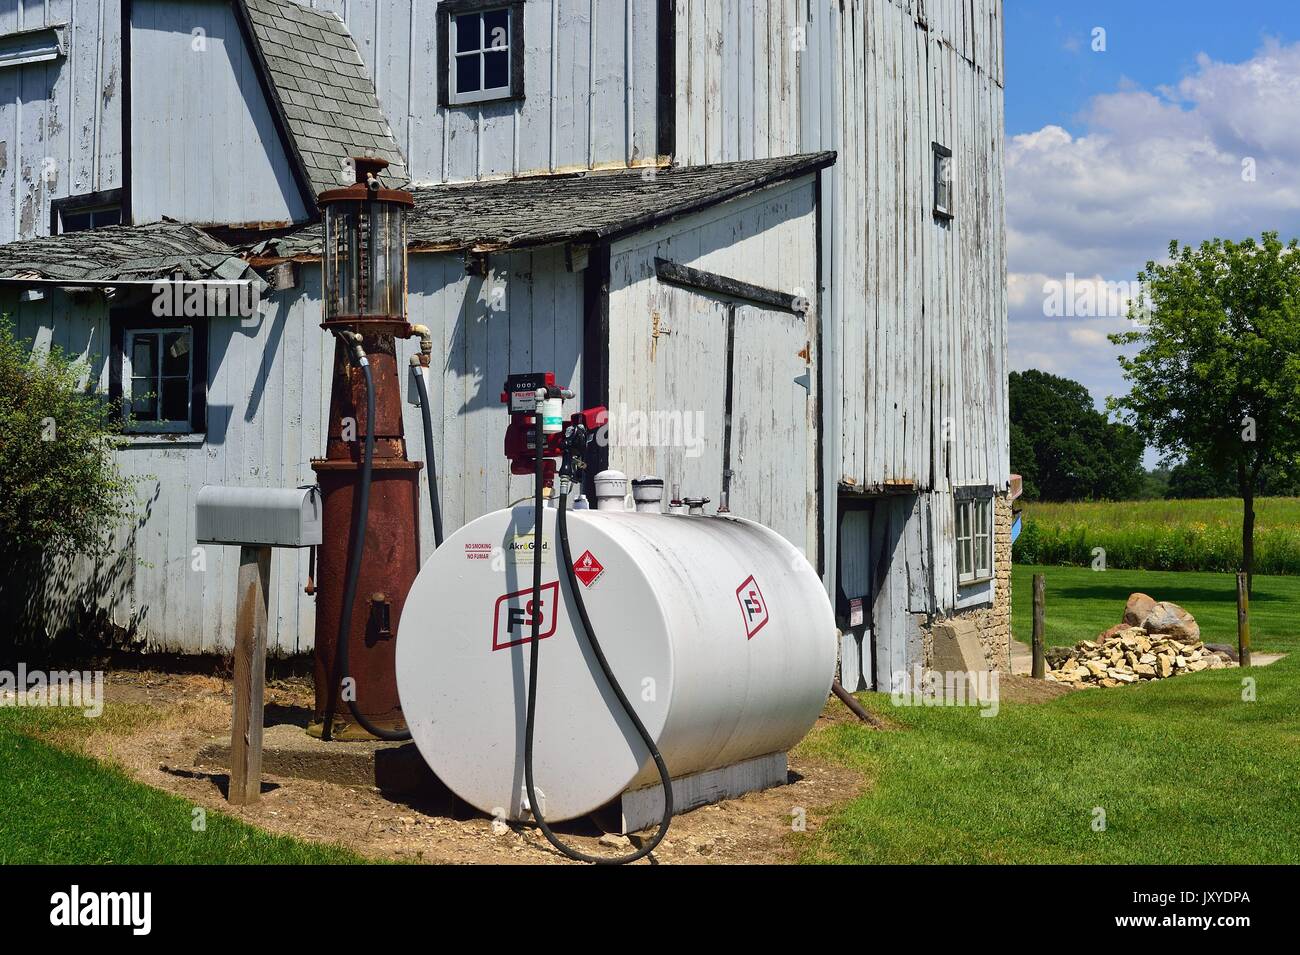 Vintage pump sits between a mailbox and current day propane tank on farm in northeastern Illinois, USA. Stock Photo